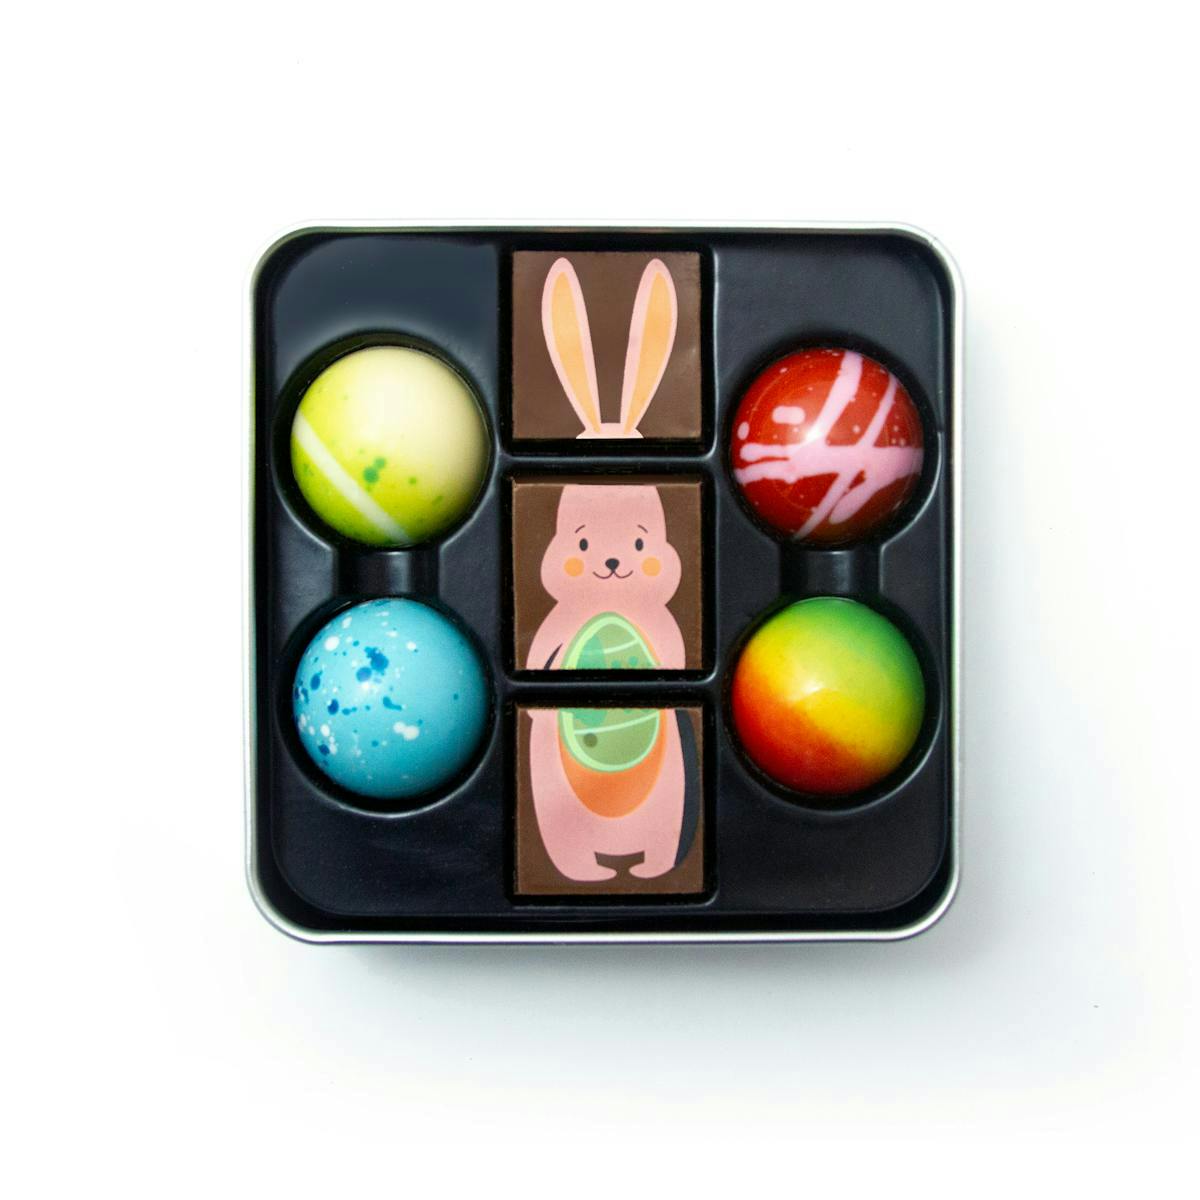 Chocolates with a cartoon bunny illustration and colourful round designs.